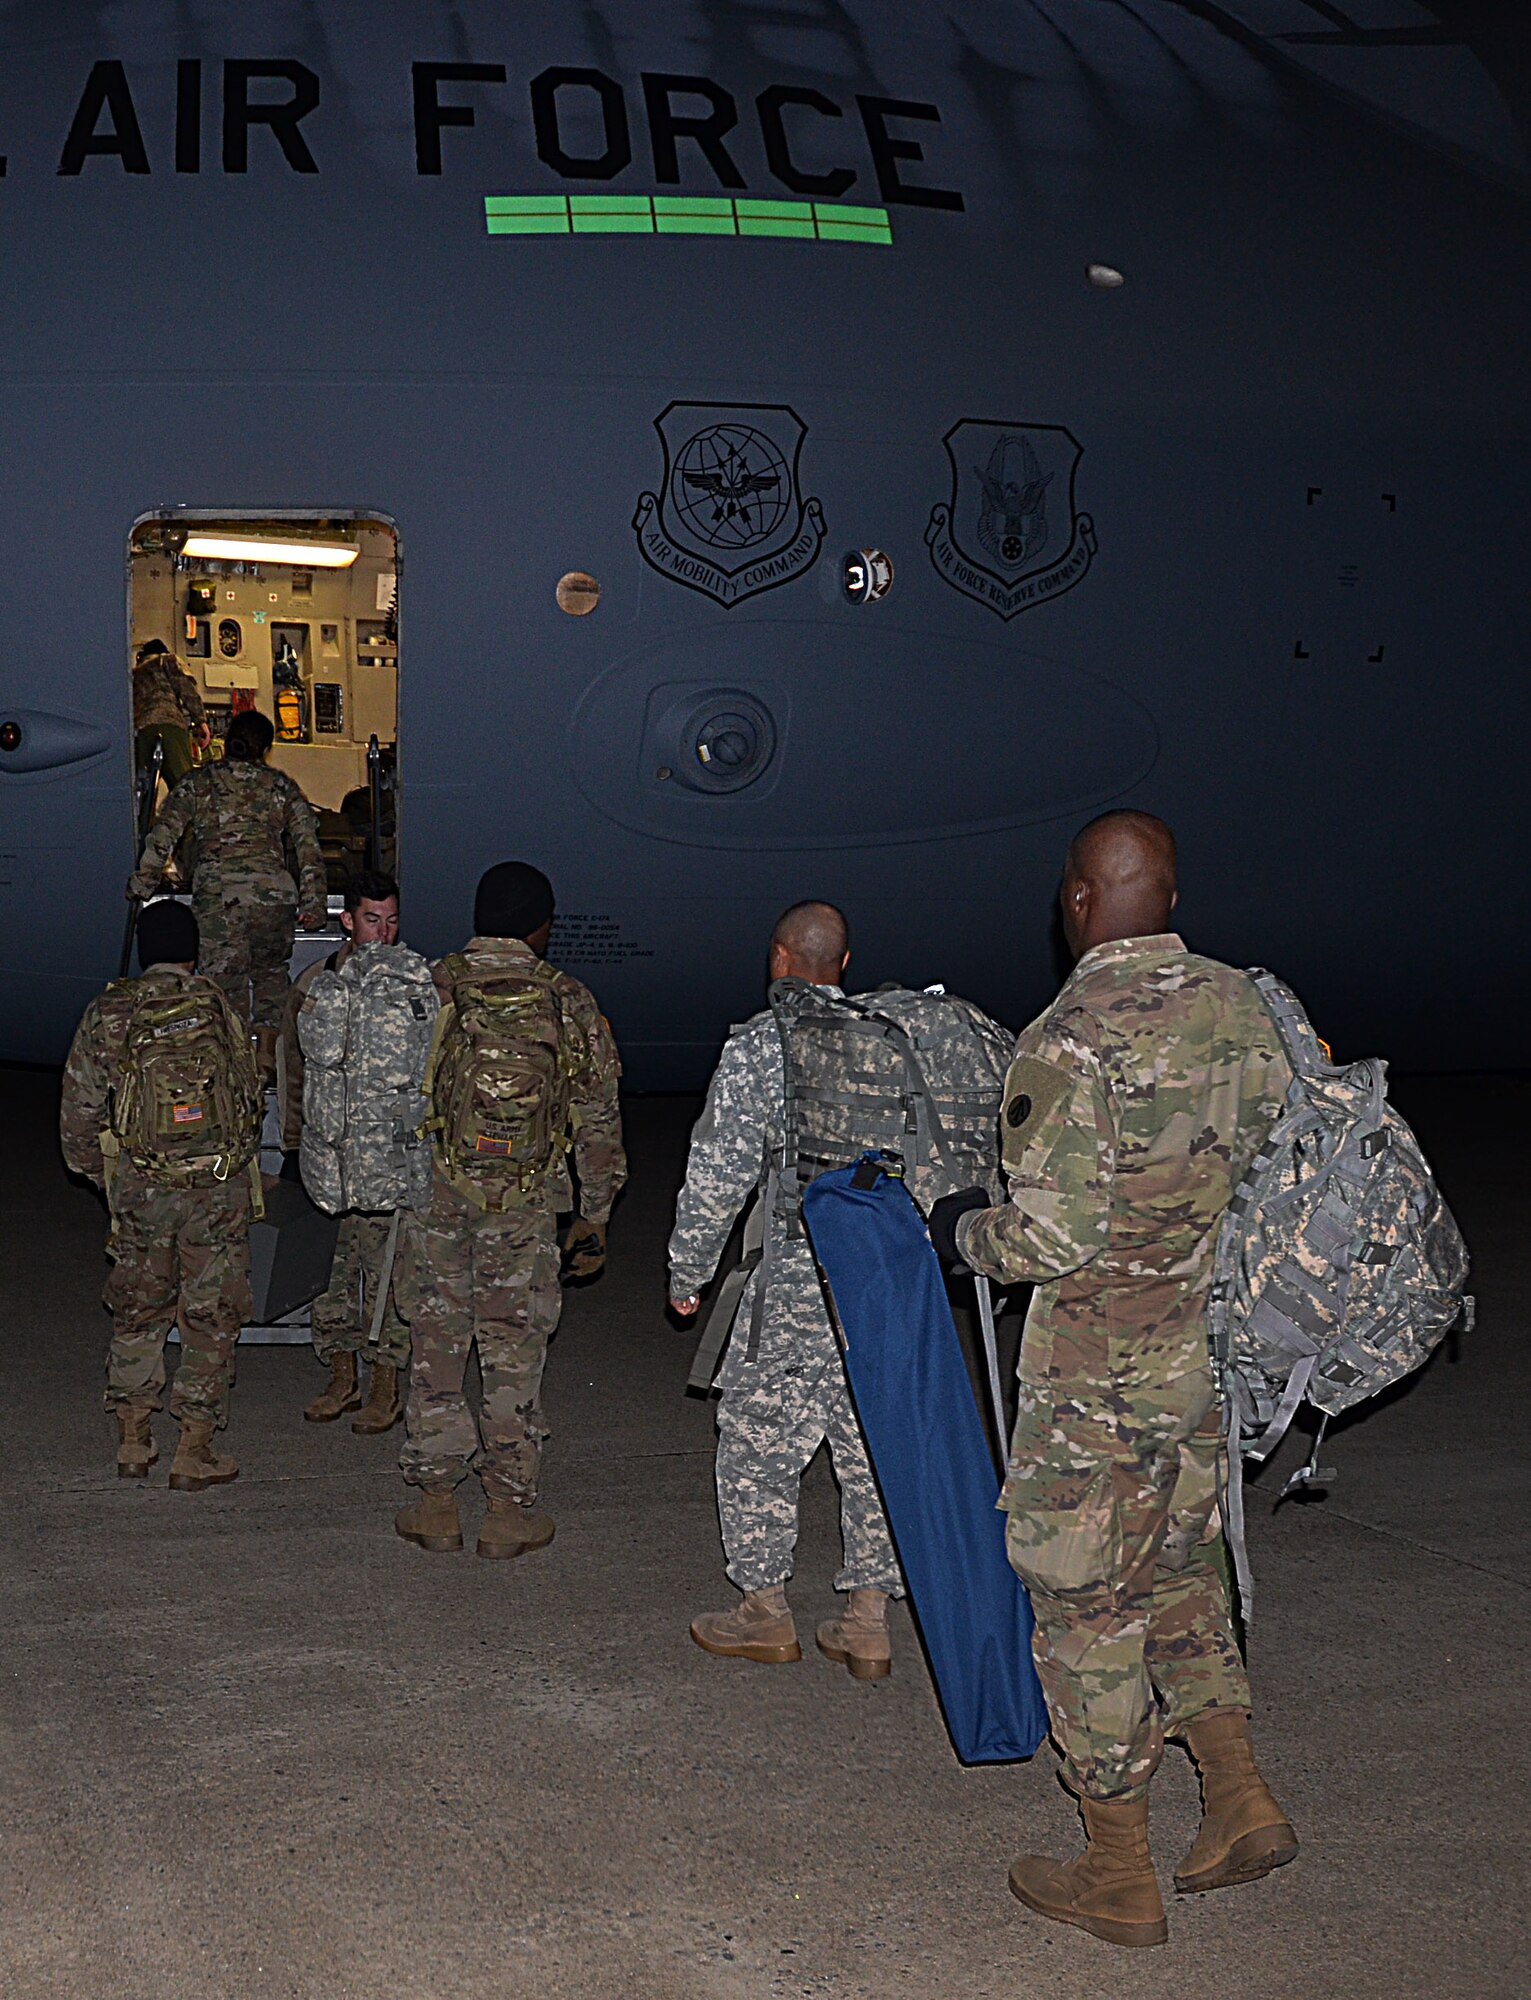 U.S. Army Soldiers assigned to the 832nd Transportation Battalion, 597th Transportation Brigade, step onto a U.S. Air Force Air Mobility Command C-17 at Joint Base Langley-Eustis, Va., Oct. 18, 2017.